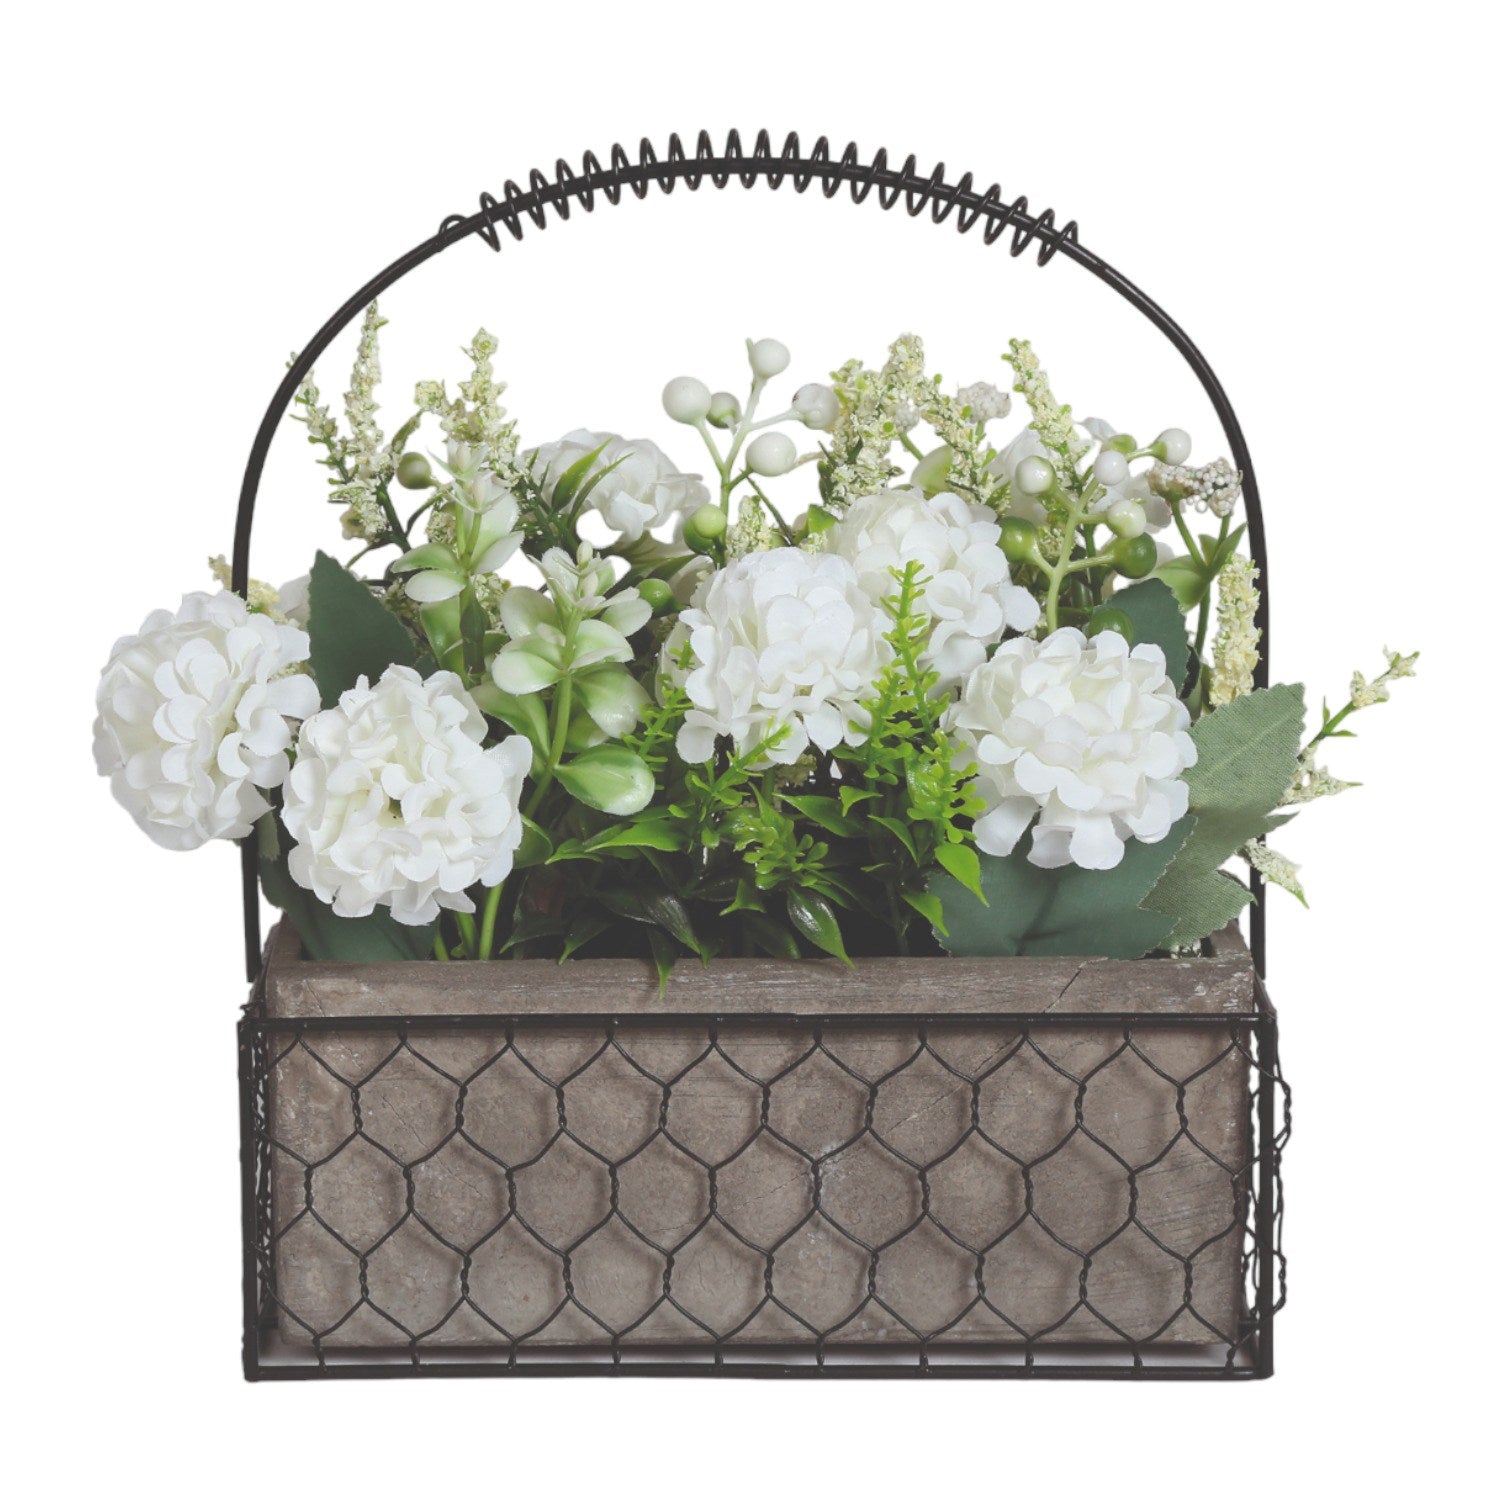 White Florals in a Wired Basket | More Than Just A Gift